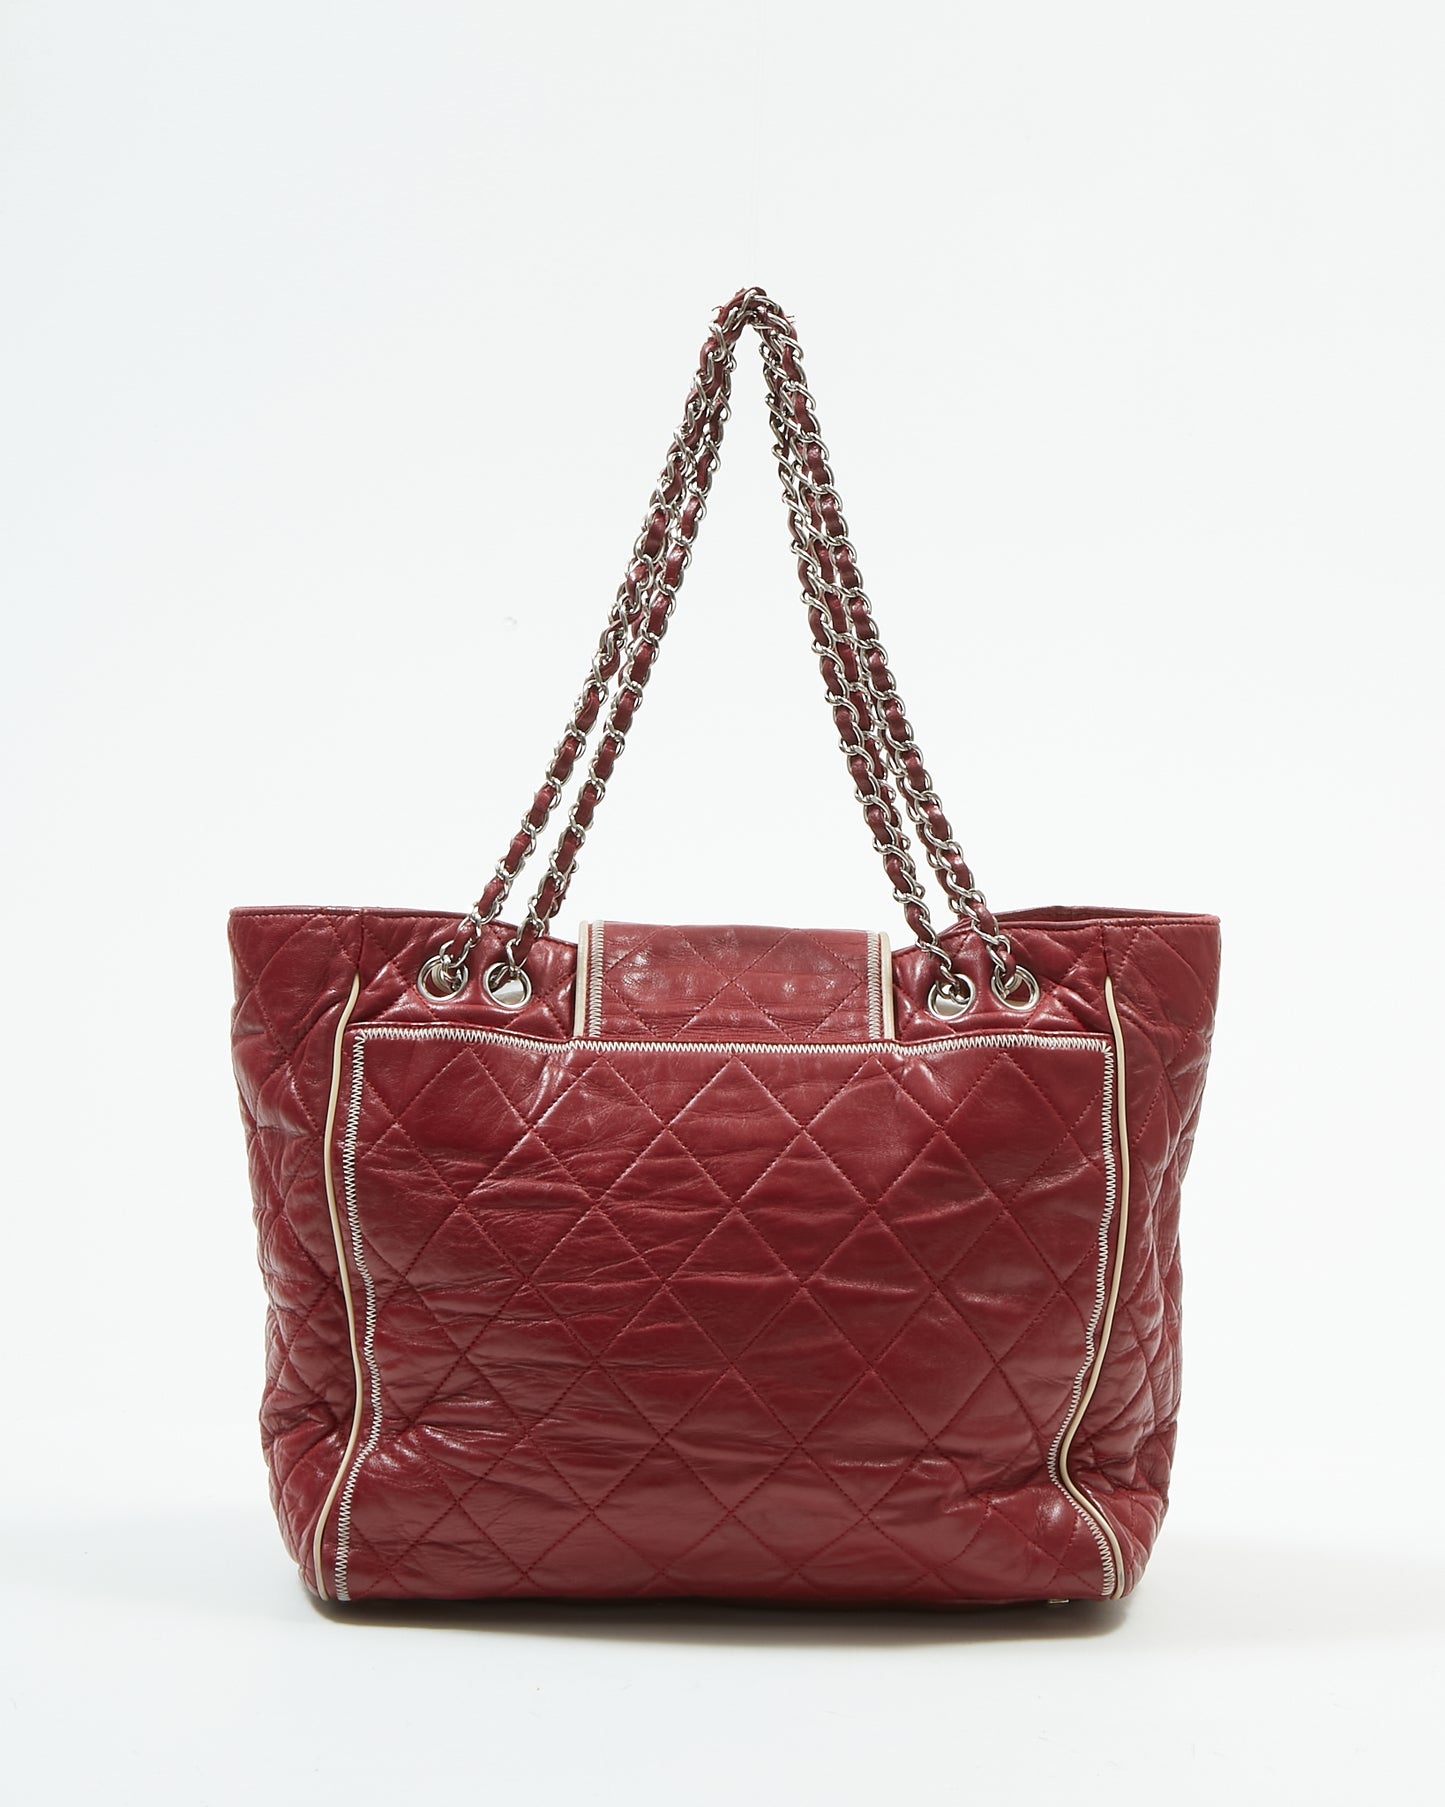 Chanel Red Burgundy Quilted Leather East West Reissue Tote